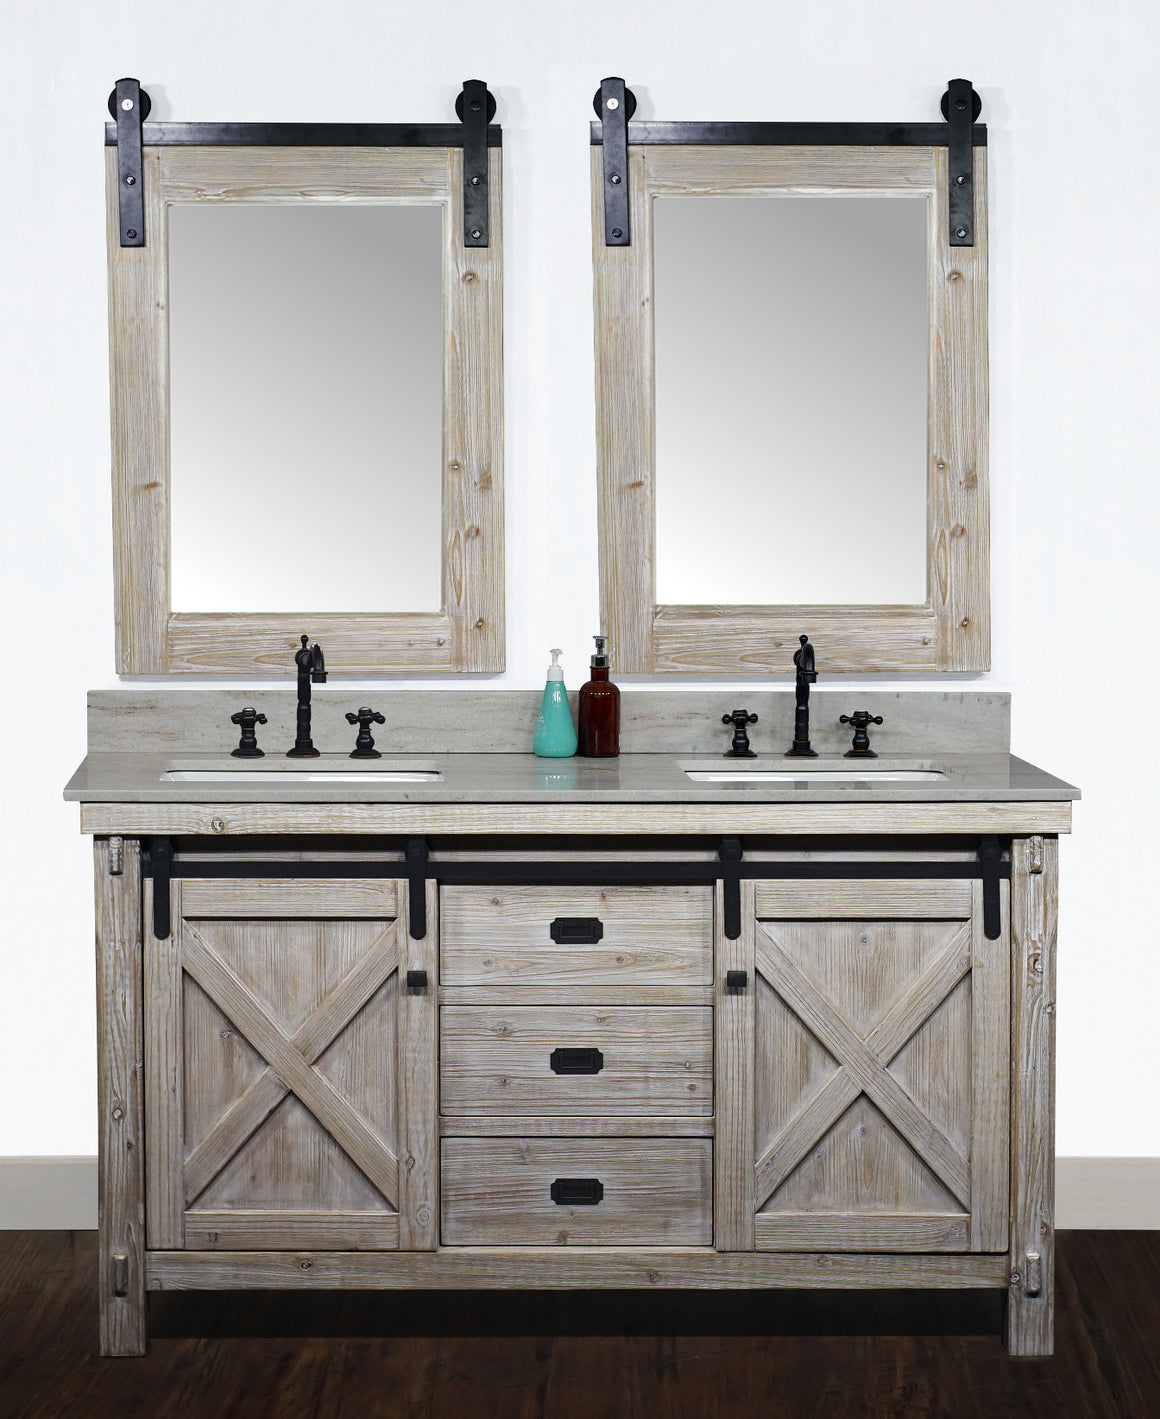 60"RUSTIC SOLID FIR BARN DOOR STYLE DOUBLE SINKS VANITY WITH COASTAL SANDS MARBLE TOP WITH RECTANGULAR SINK-NO FAUCET